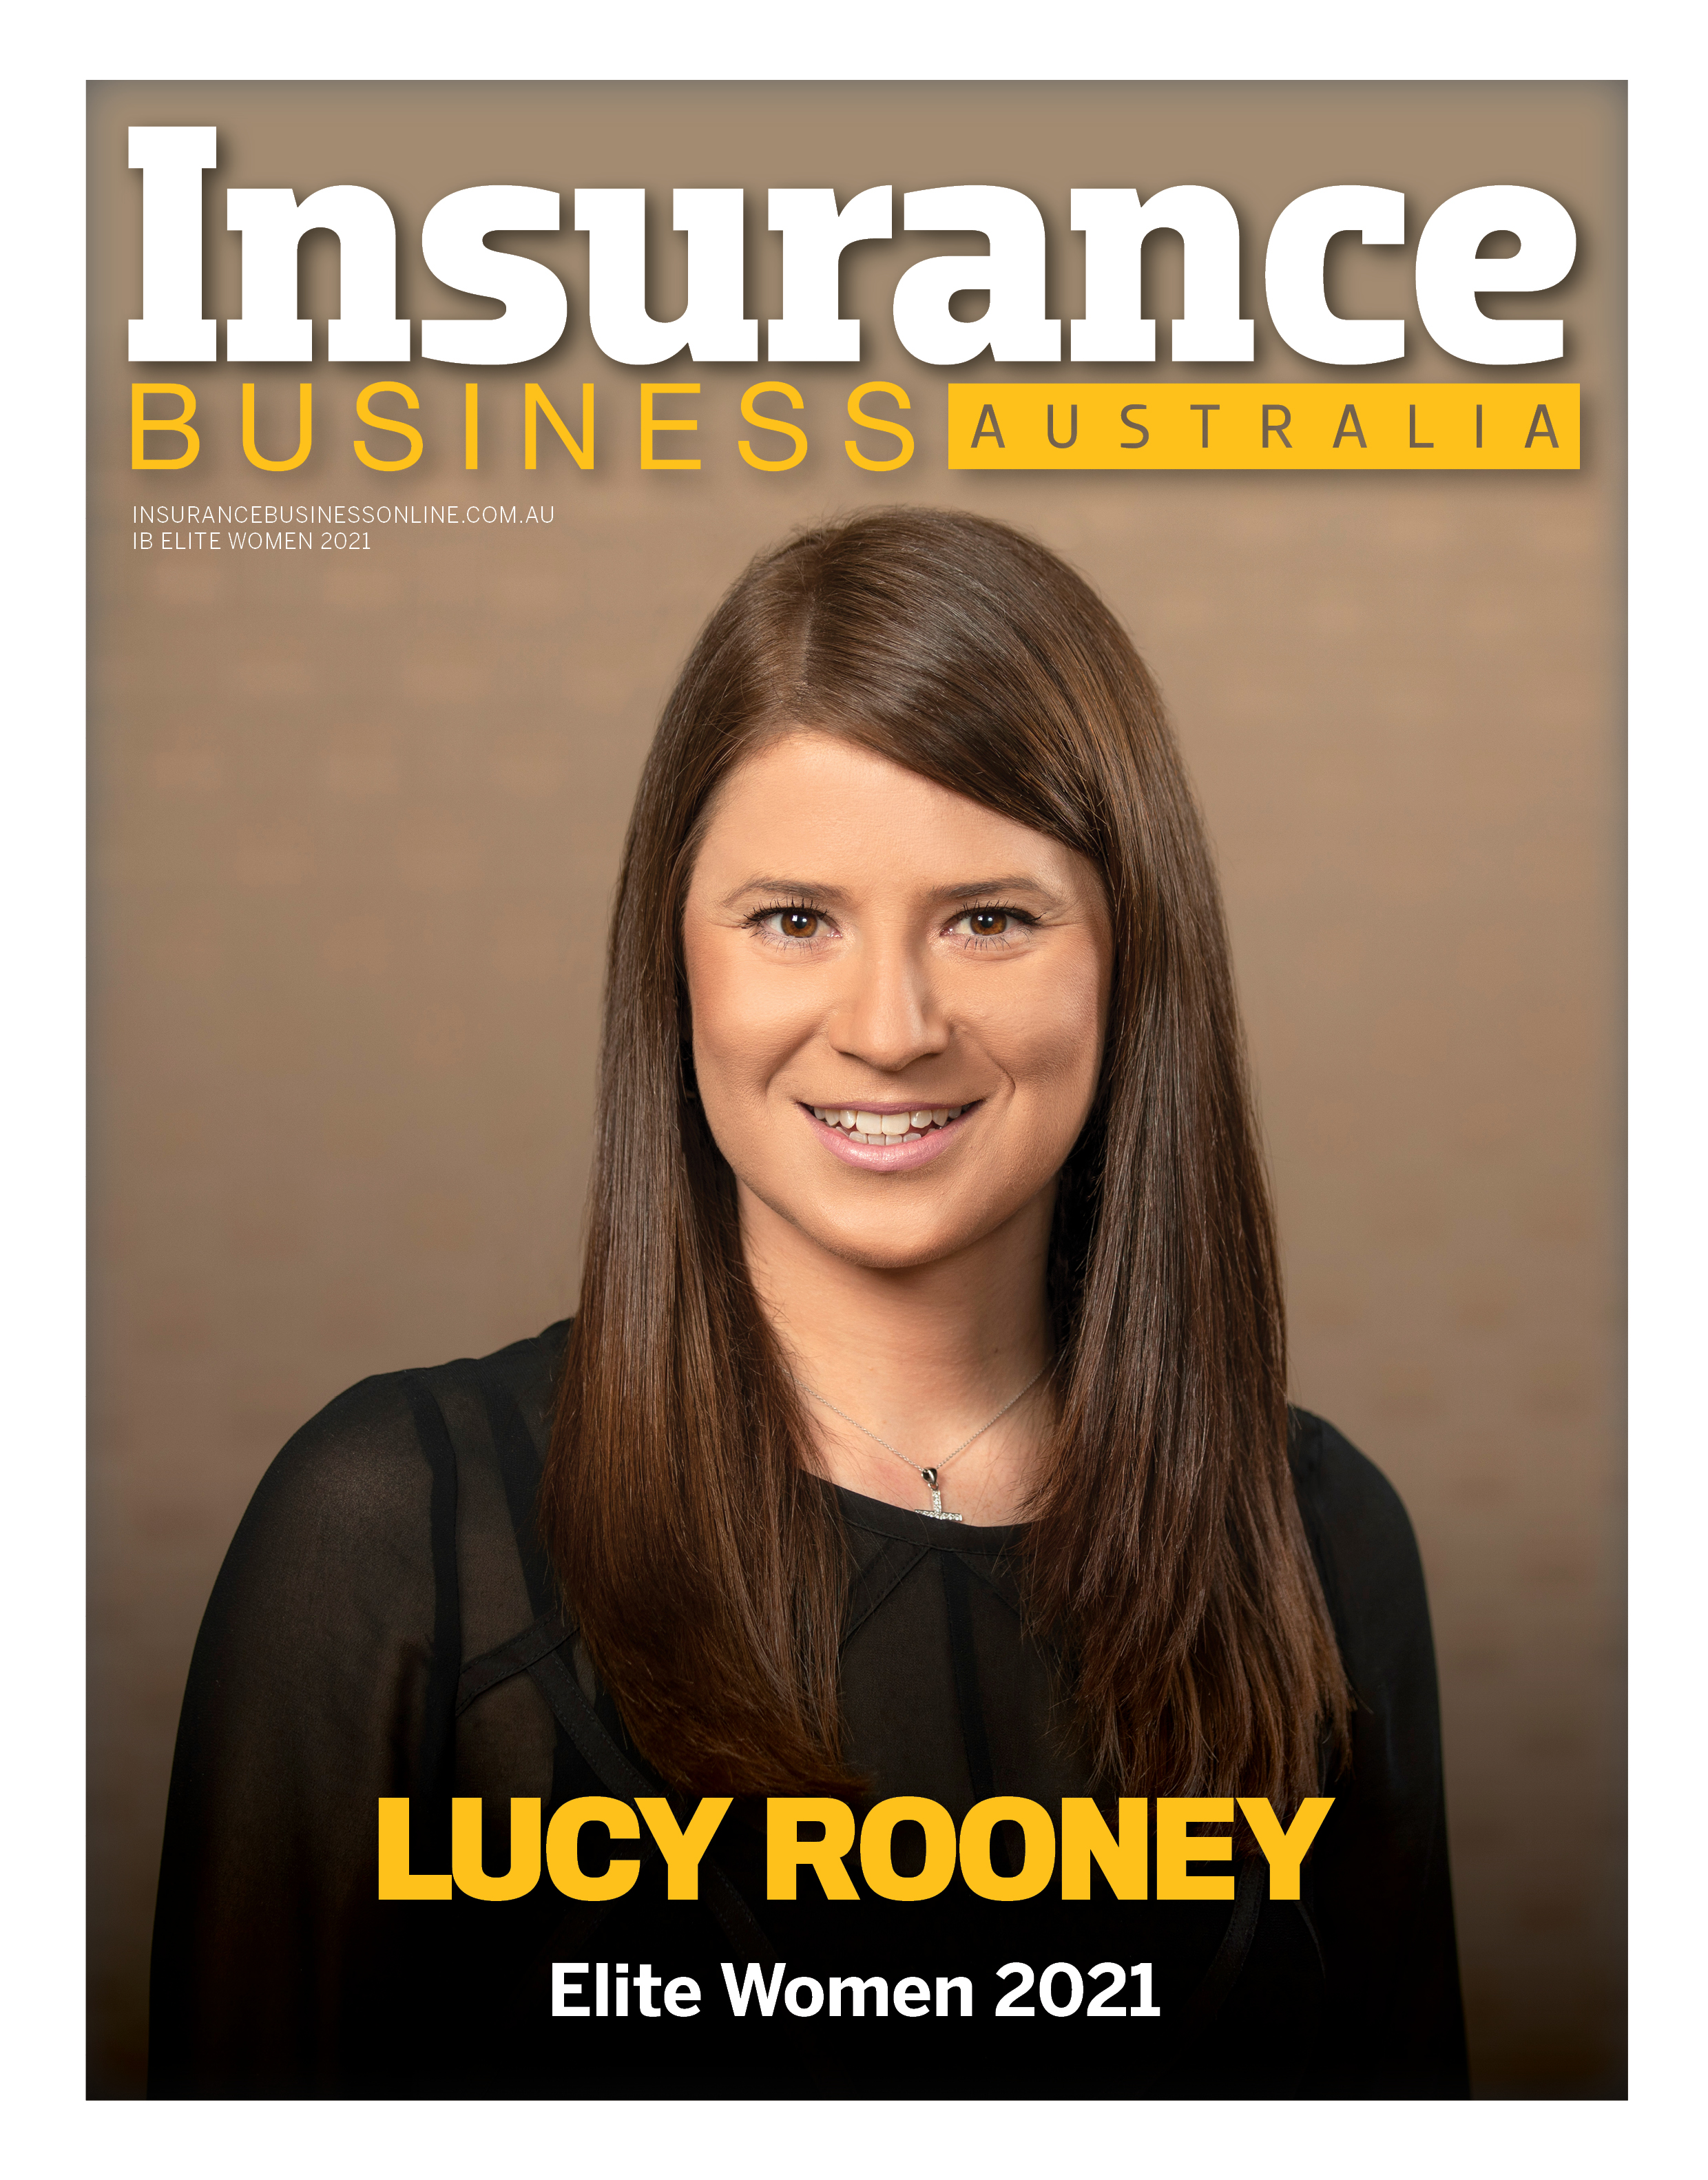 Lucy Rooney Listed in Elite Women in Insurance 2021: Insurance Business Magazine